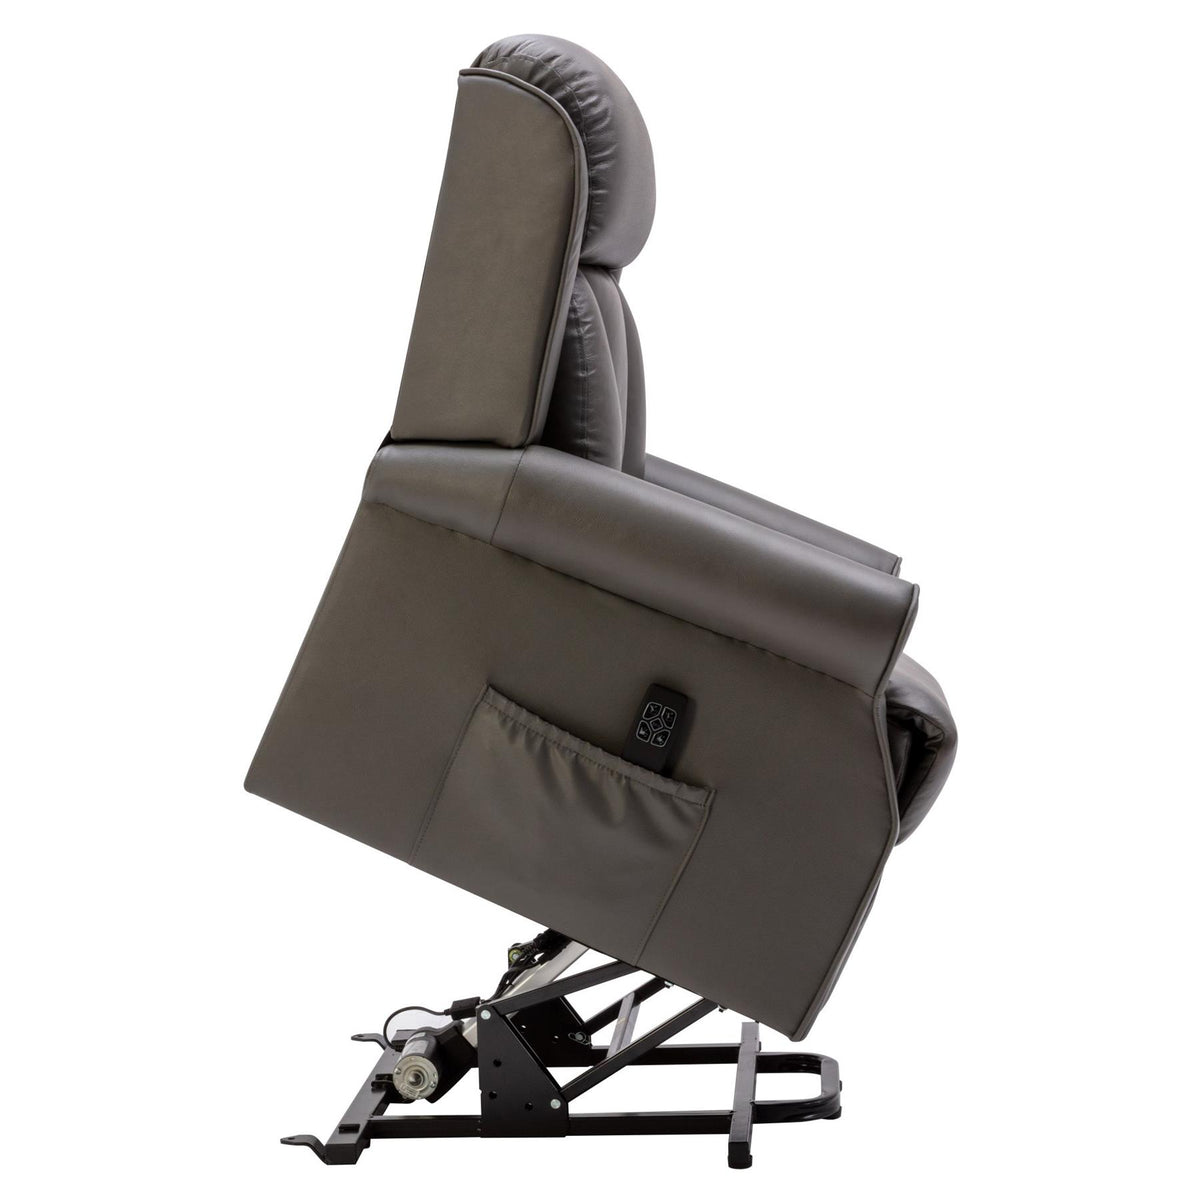 The Darwin - Dual Motor Riser Recliner Mobility Arm Chair in Grey Leat ...